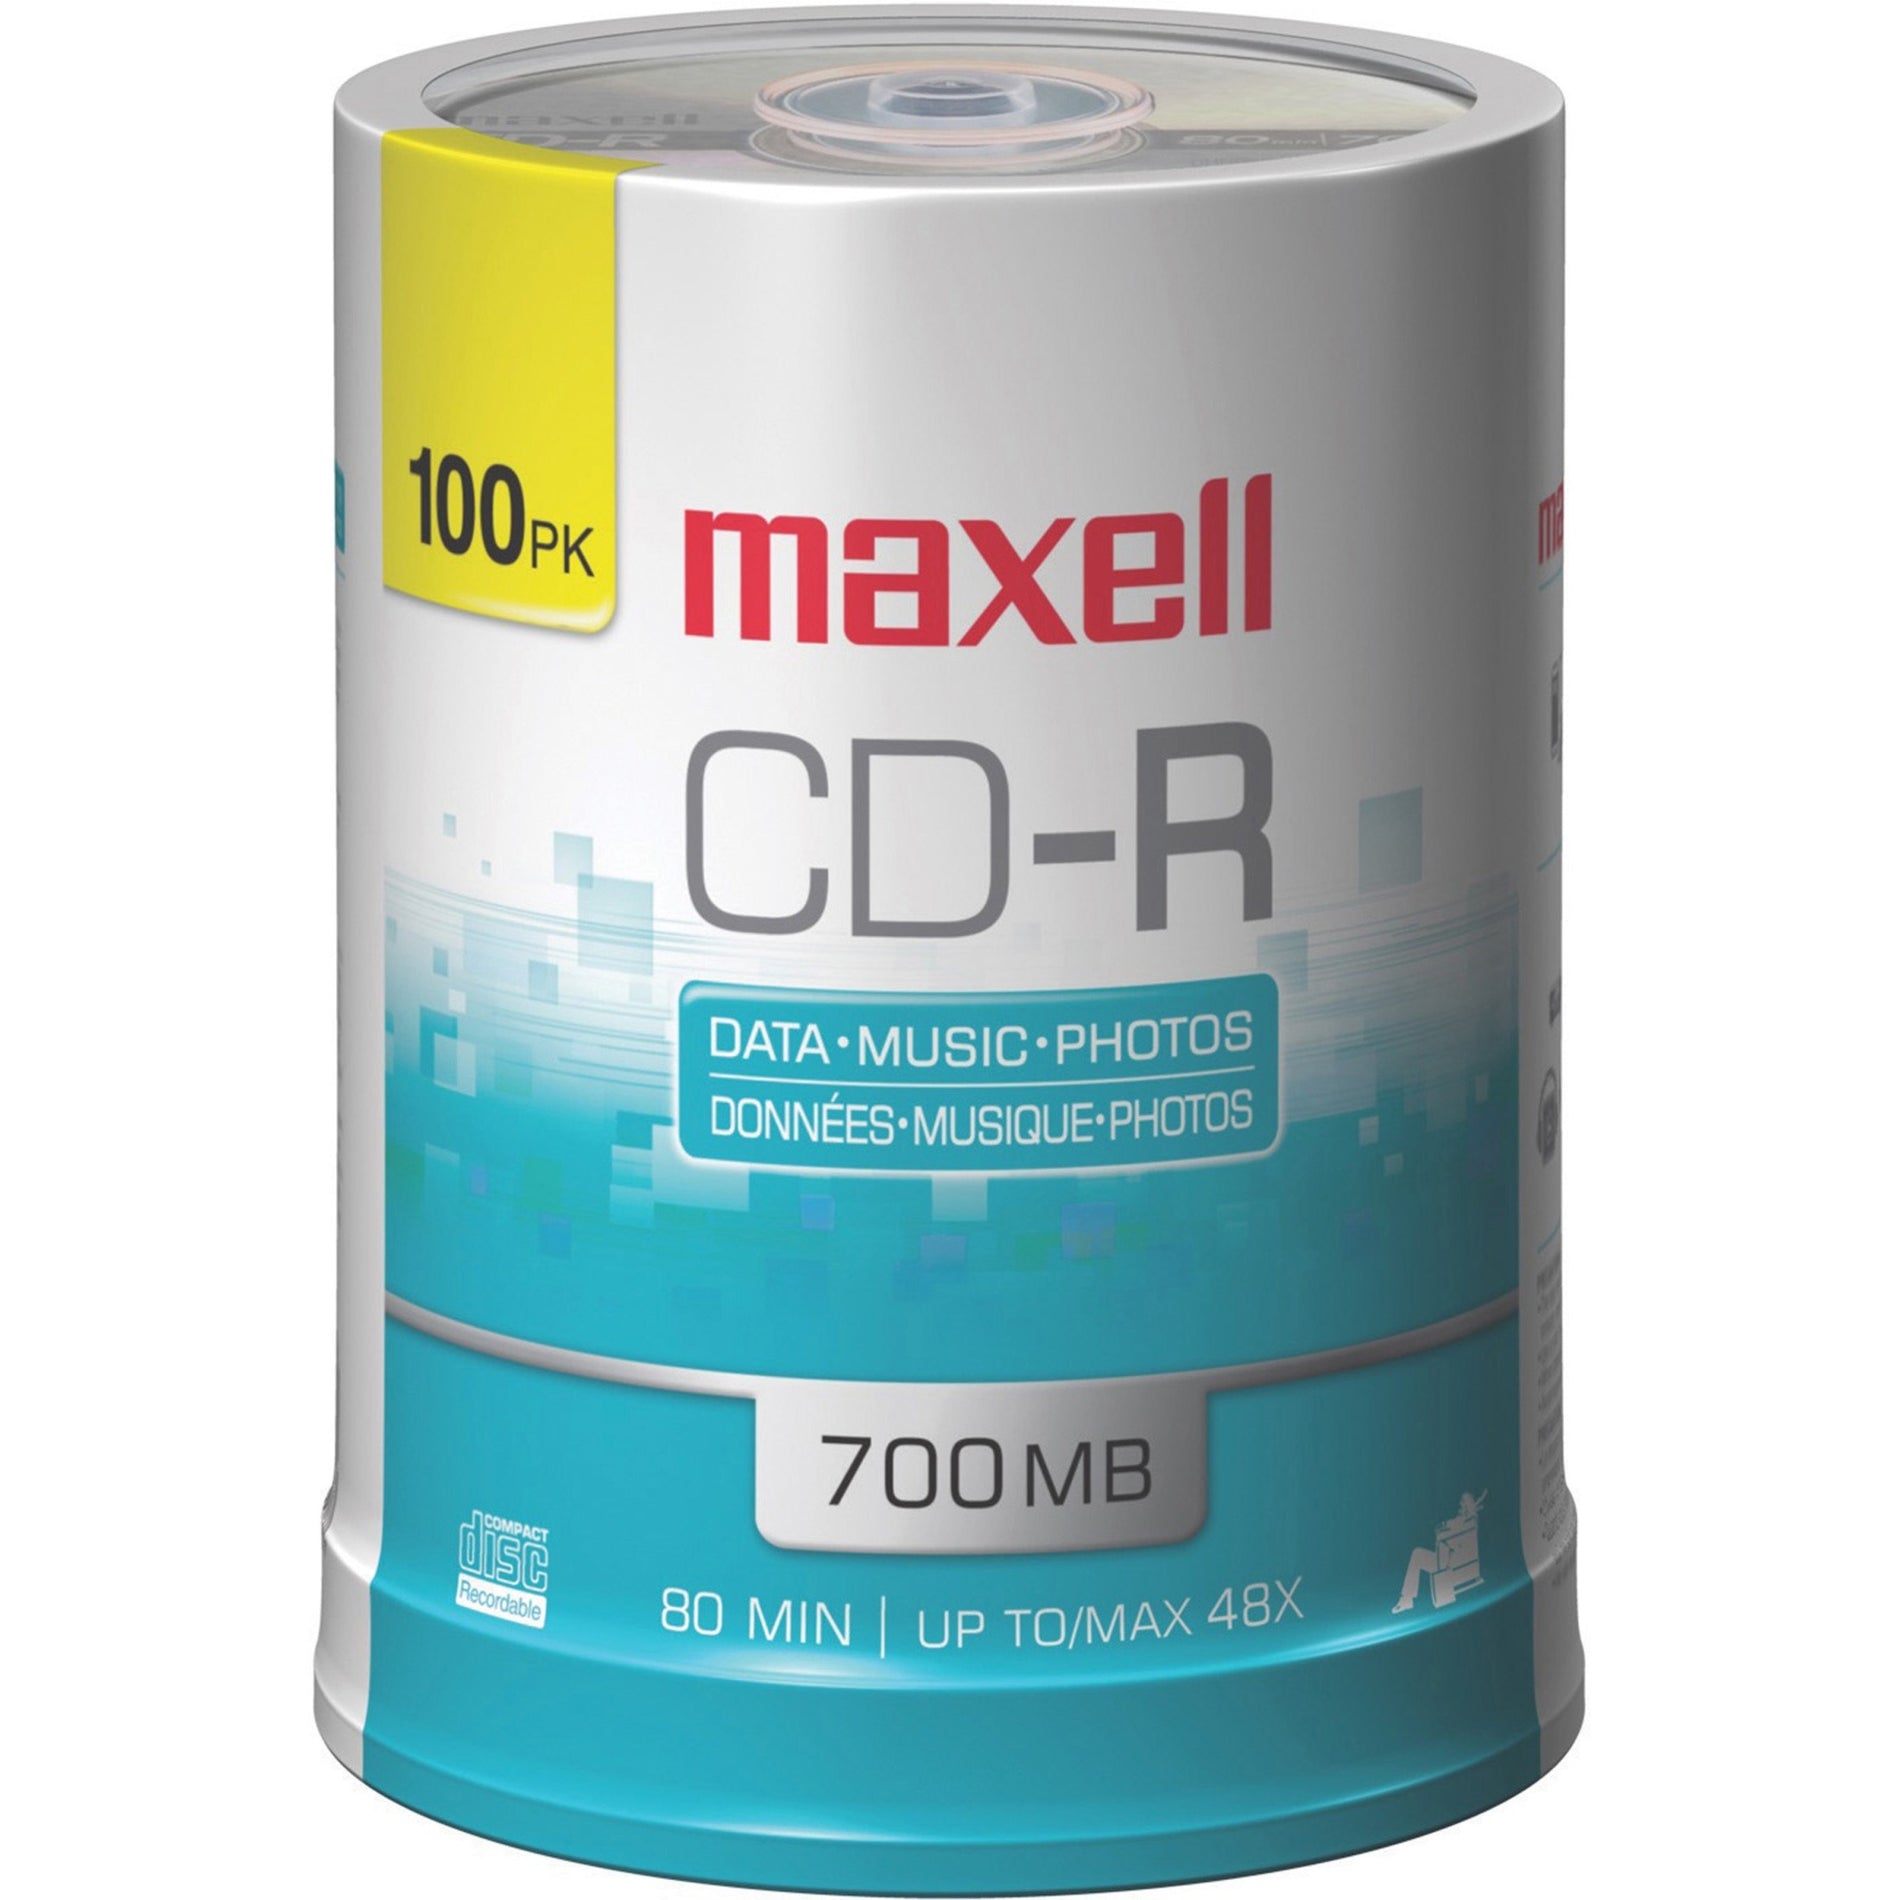 Maxell 648200 Branded Surface CD-R Discs Spindle, 80 Min/700MB, 48X, 100/PK